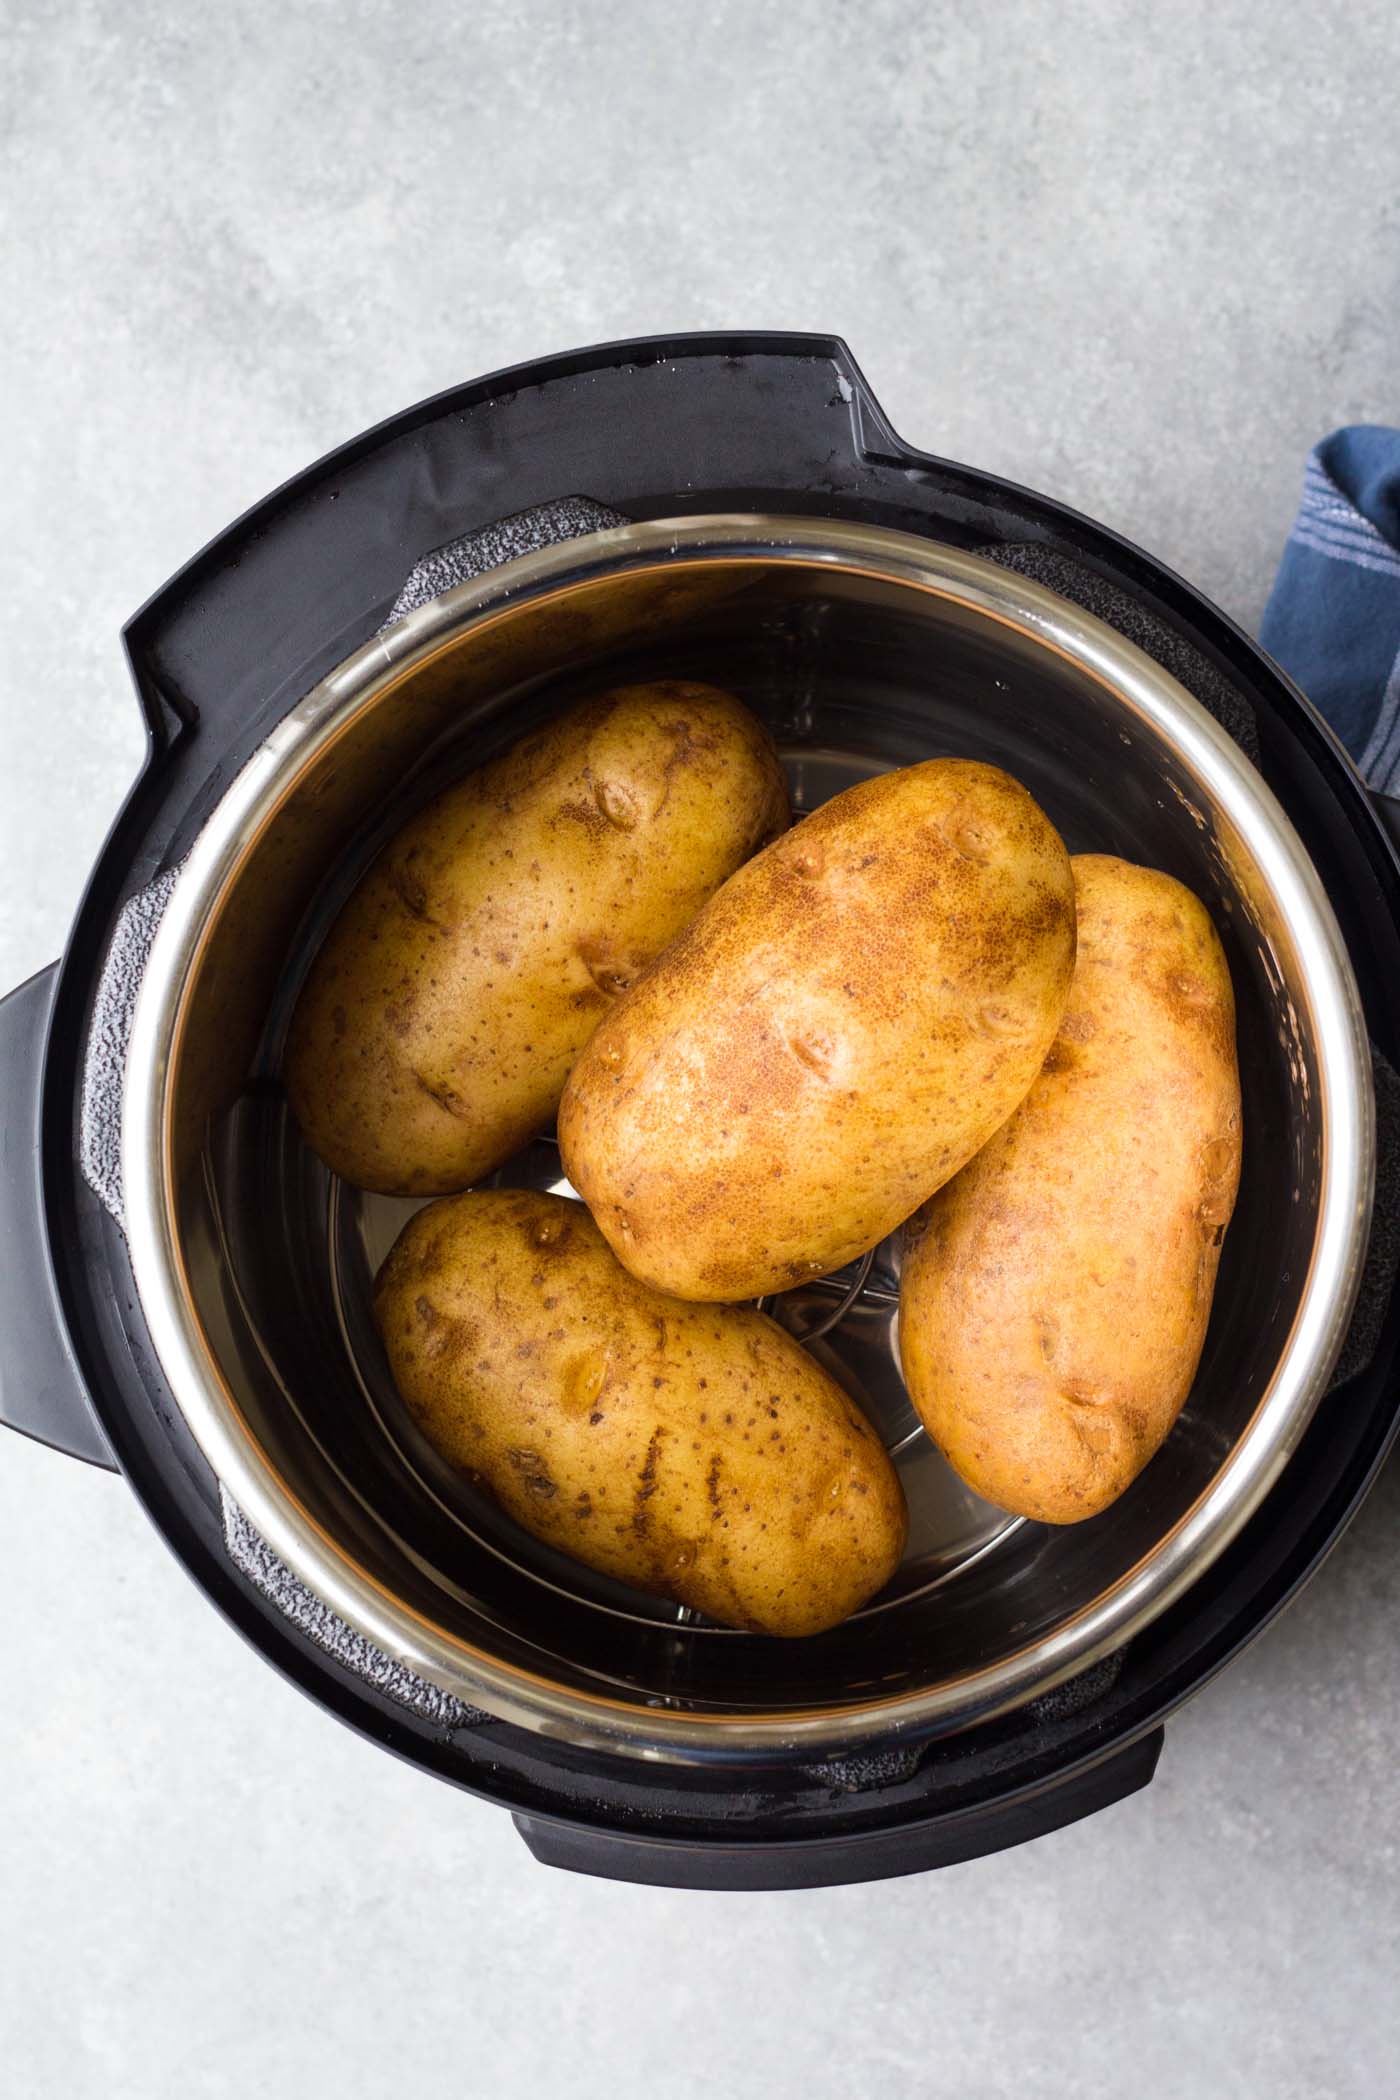 Four uncooked russet potatoes on trivet in instant pot.